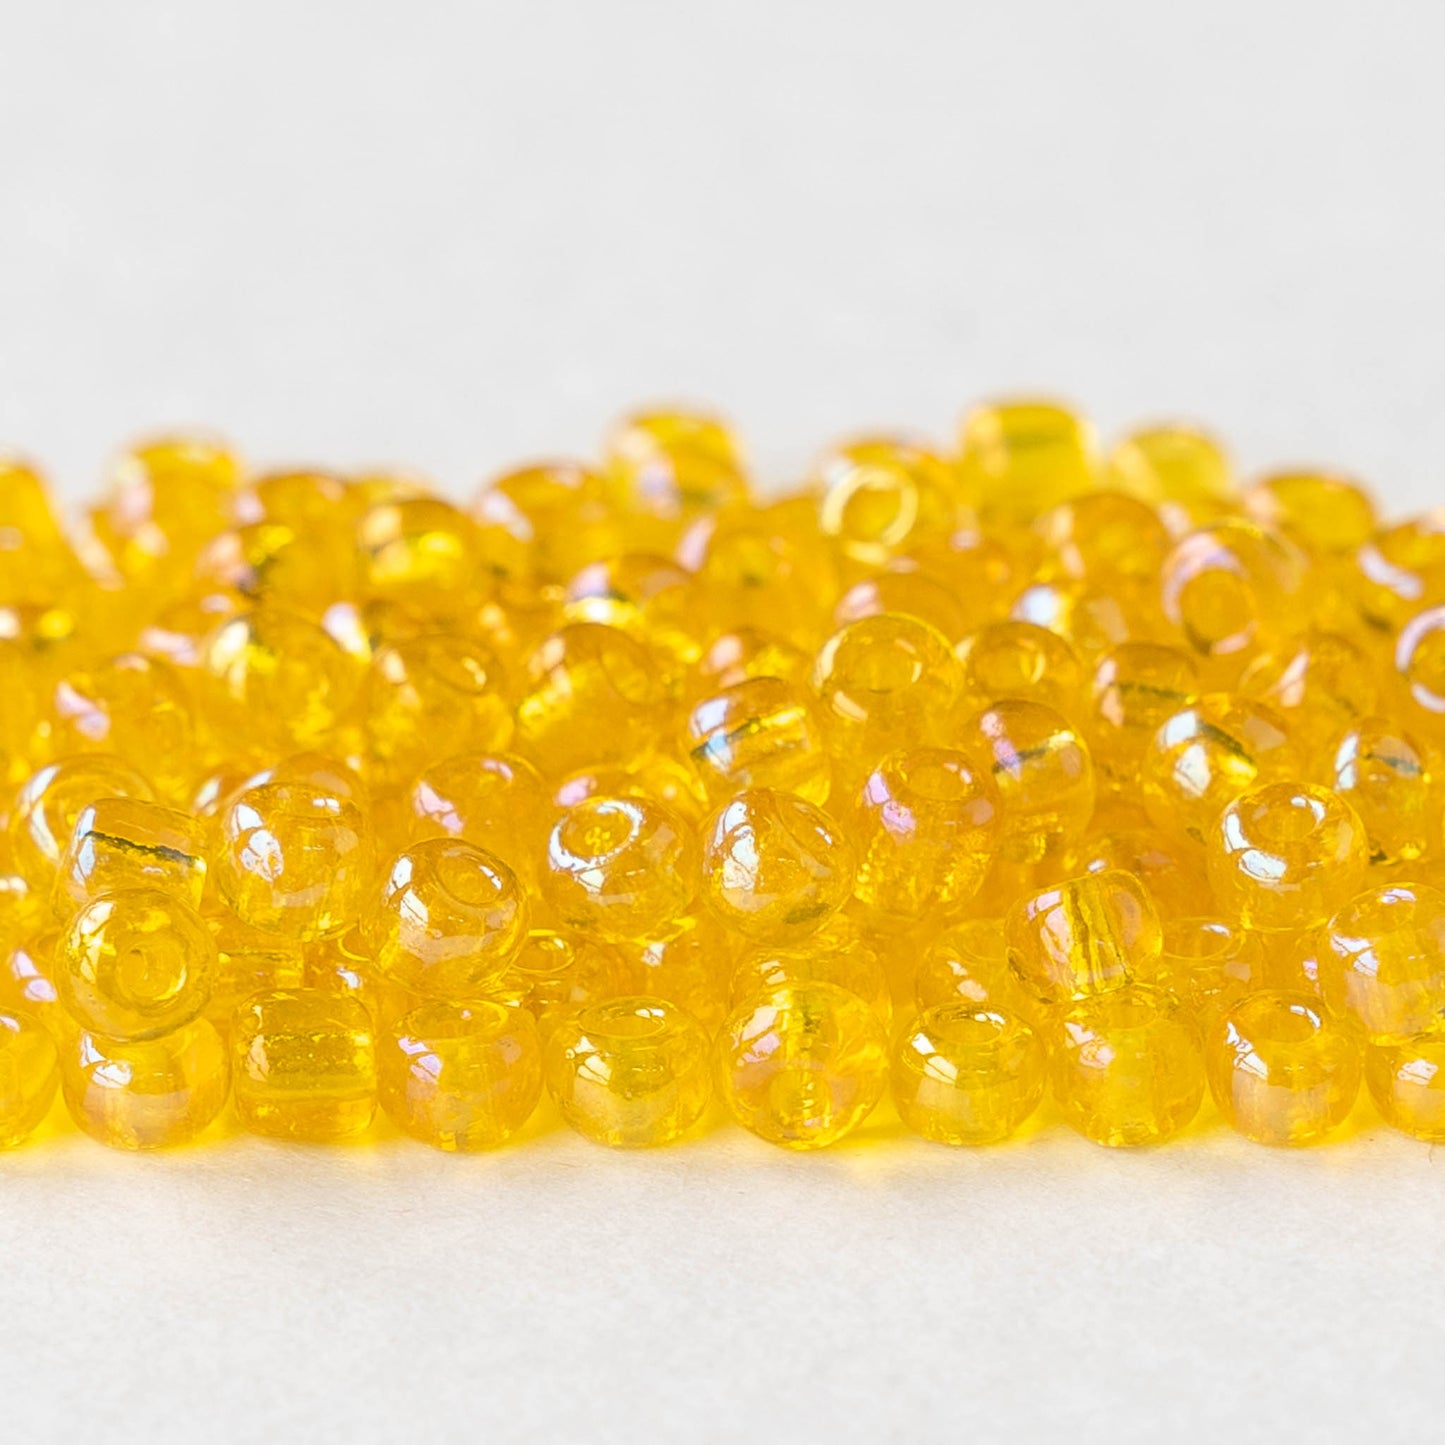 6/0 Seed Beads - Transparent Yellow AB - 20 grams